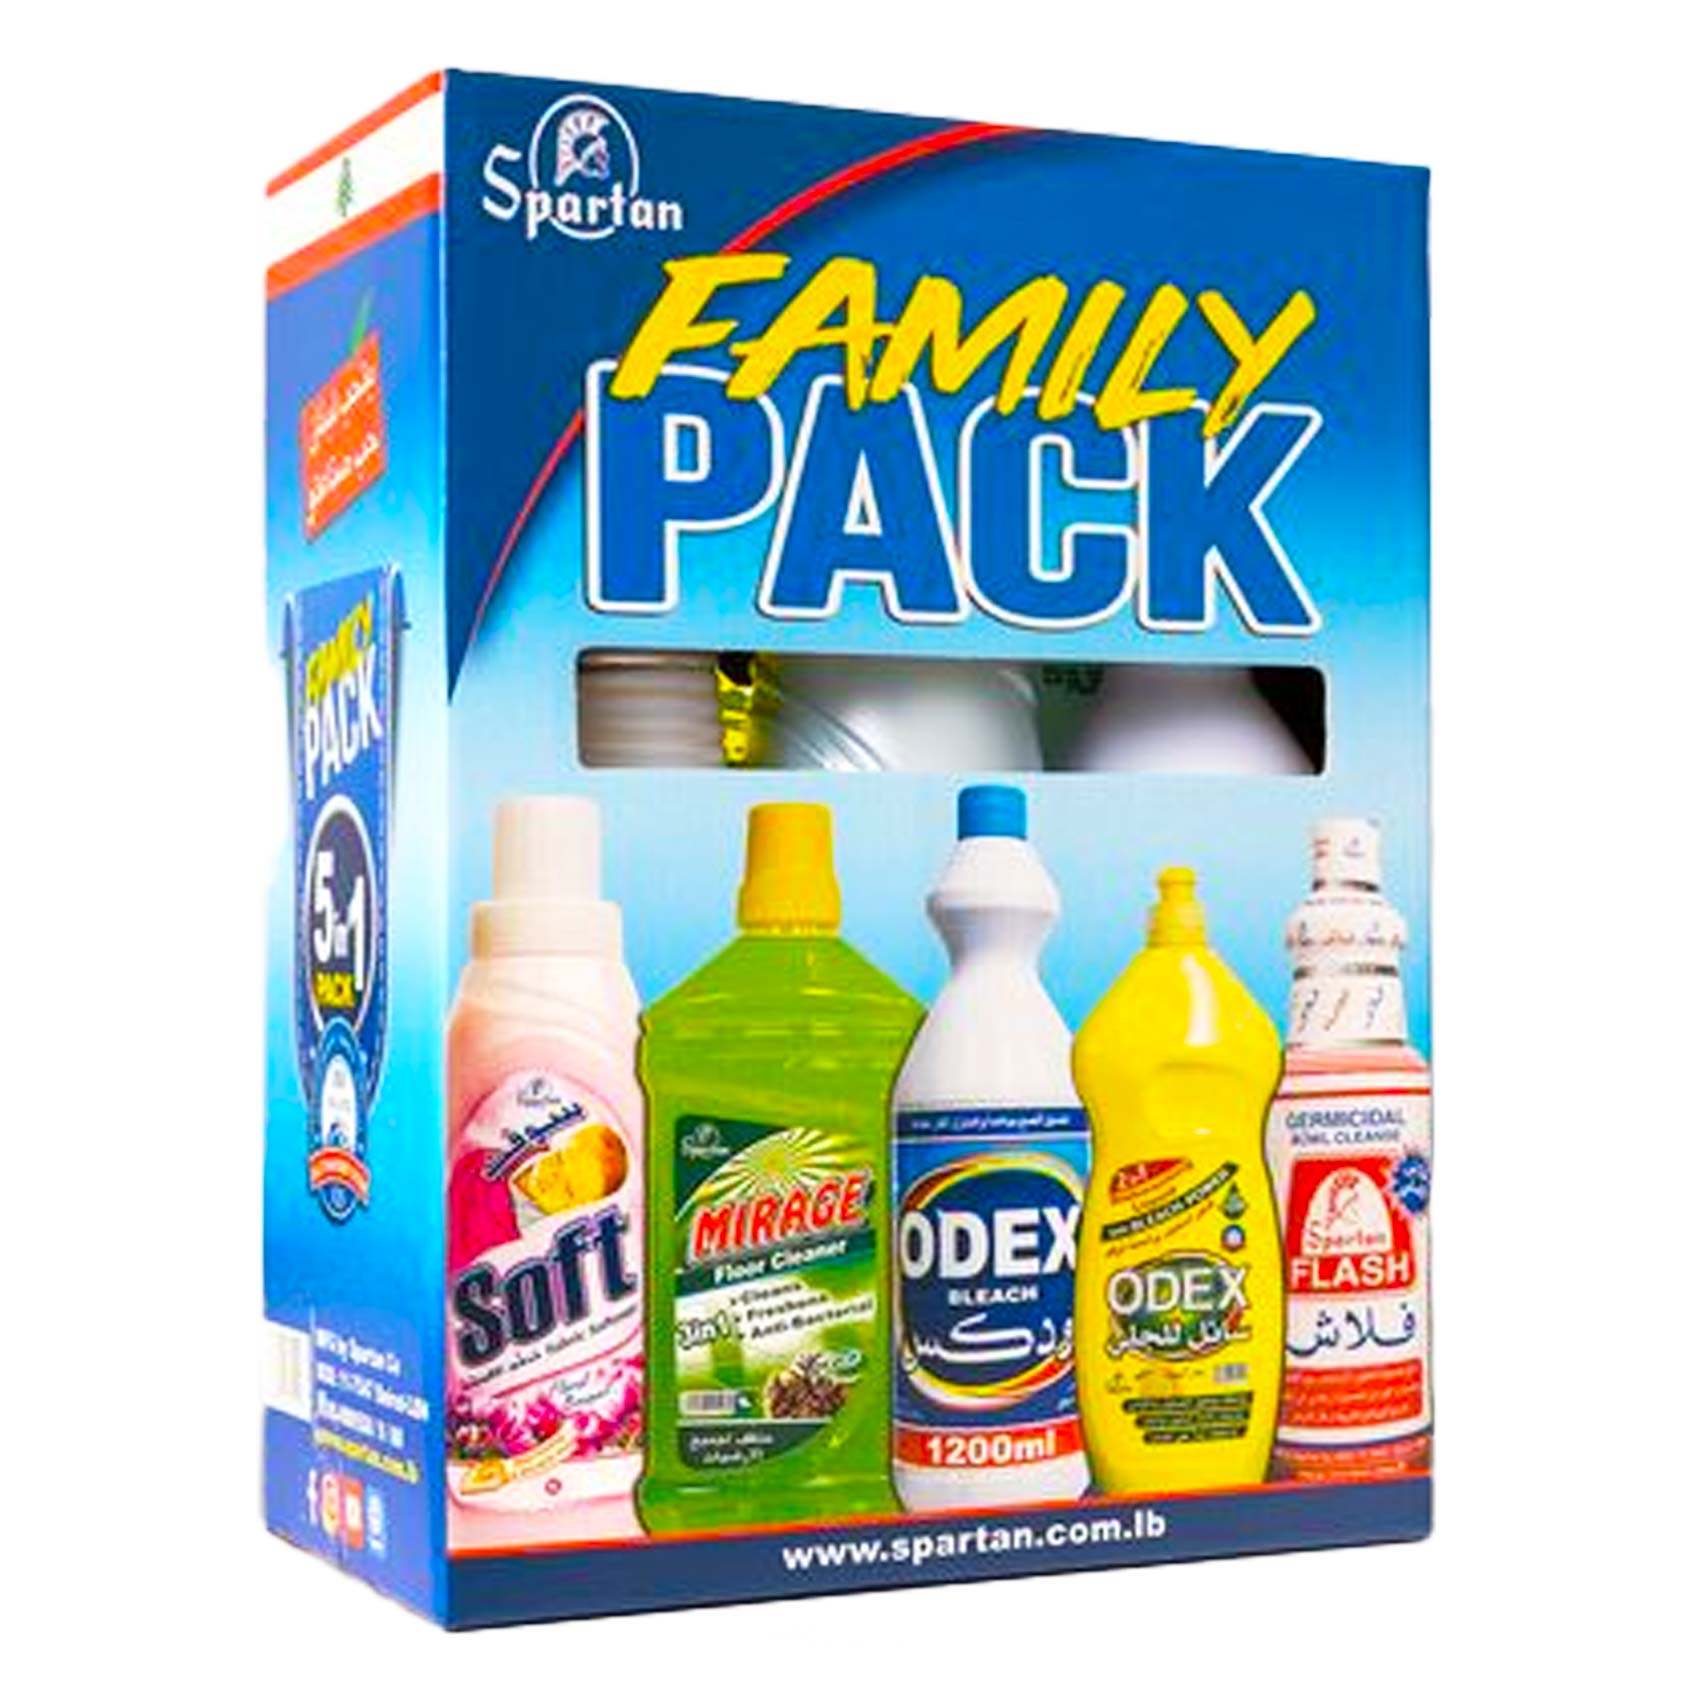 Spartan 5In1 Family Pack Detergent 5 Count